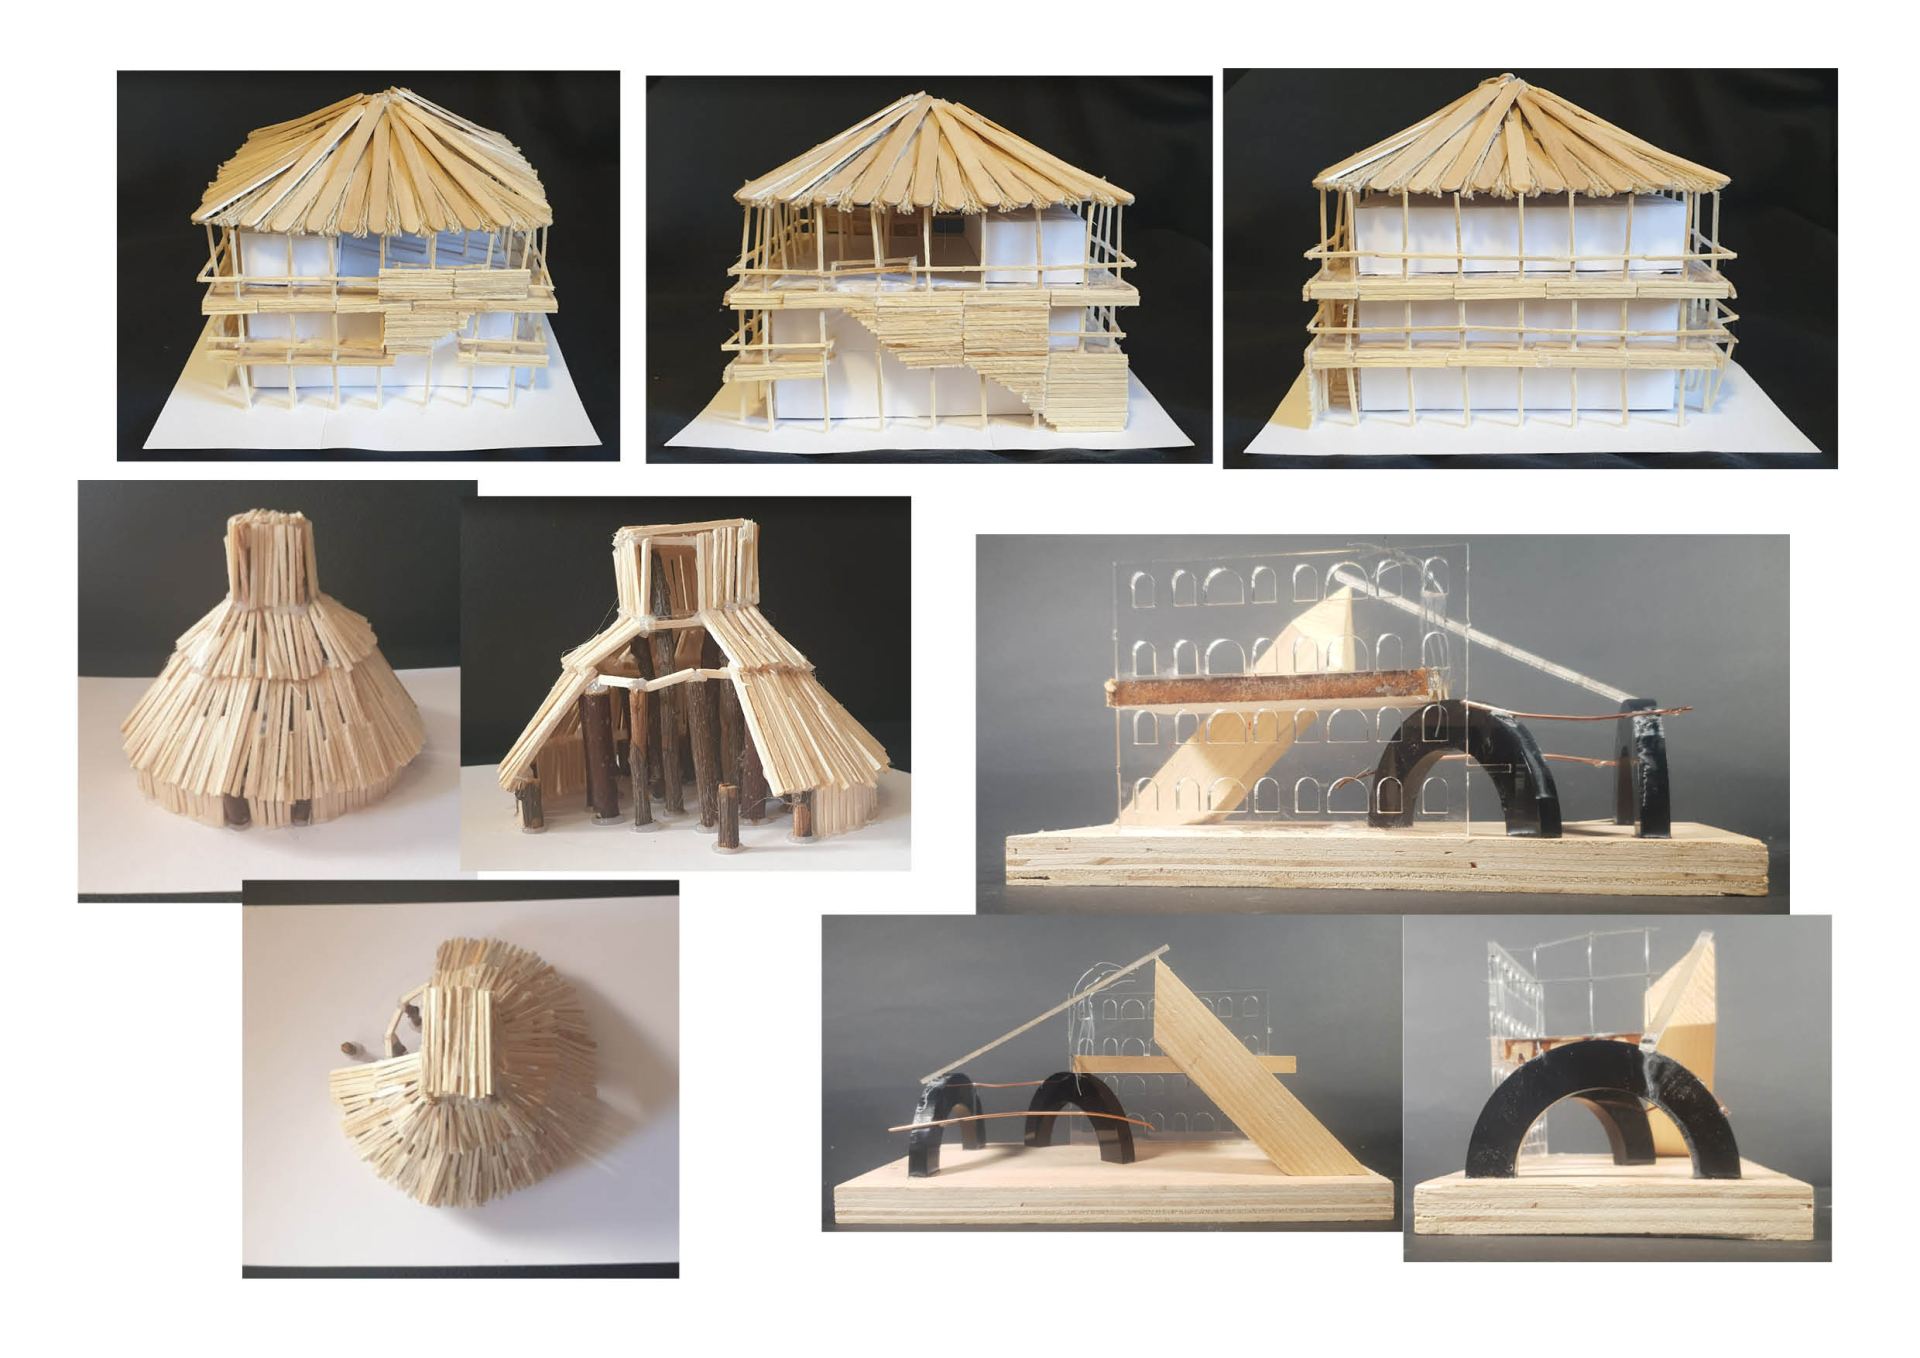 A collection of models showcasing modern and vernacular structures as well as a concept idea